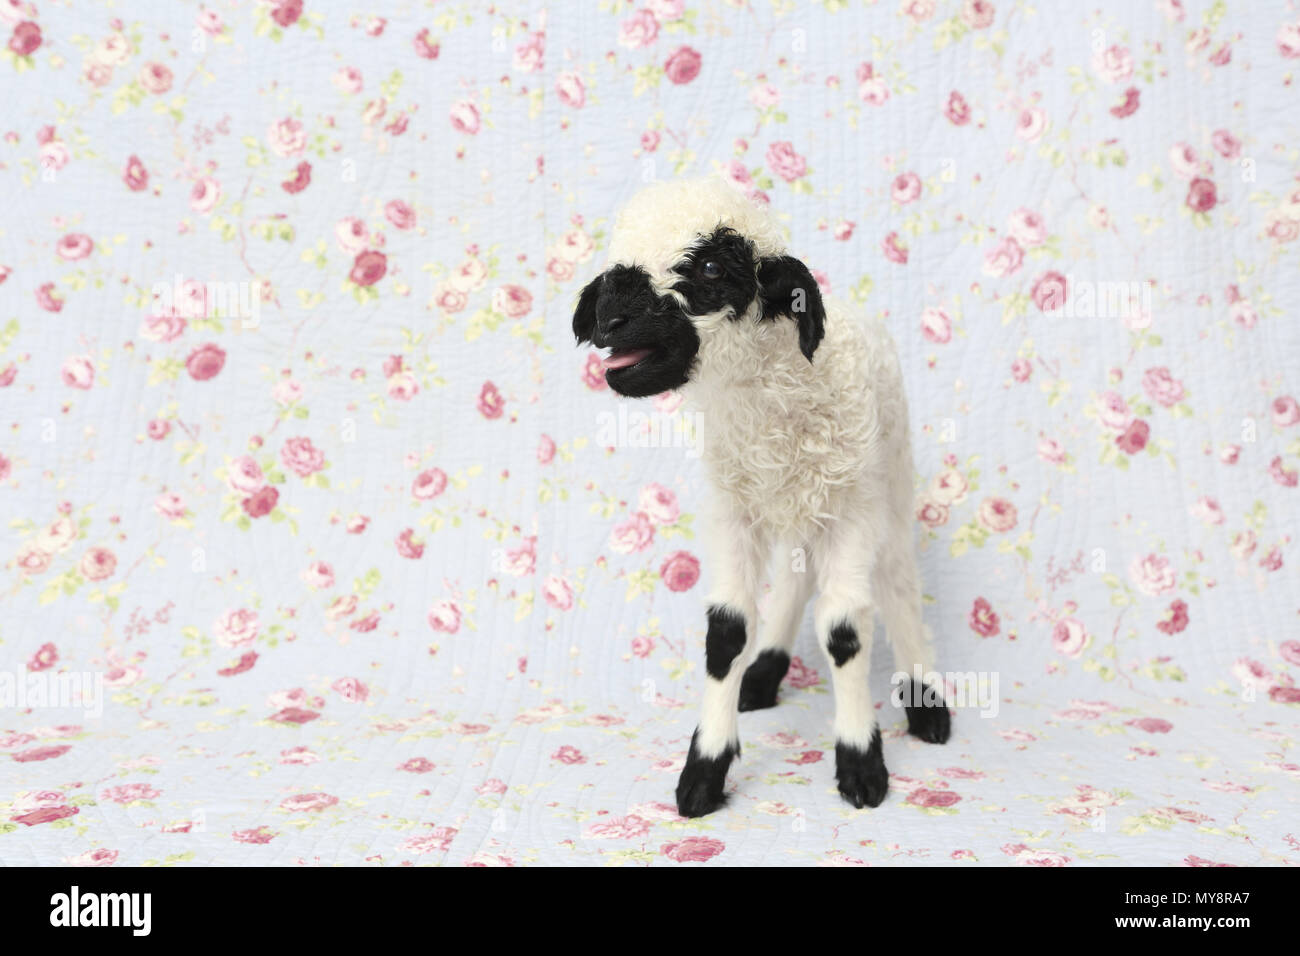 Valais Blacknose Sheep. Lamb (10 days old) standing while bleating. Studio picture against a blue background with rose flower print. Germany Stock Photo